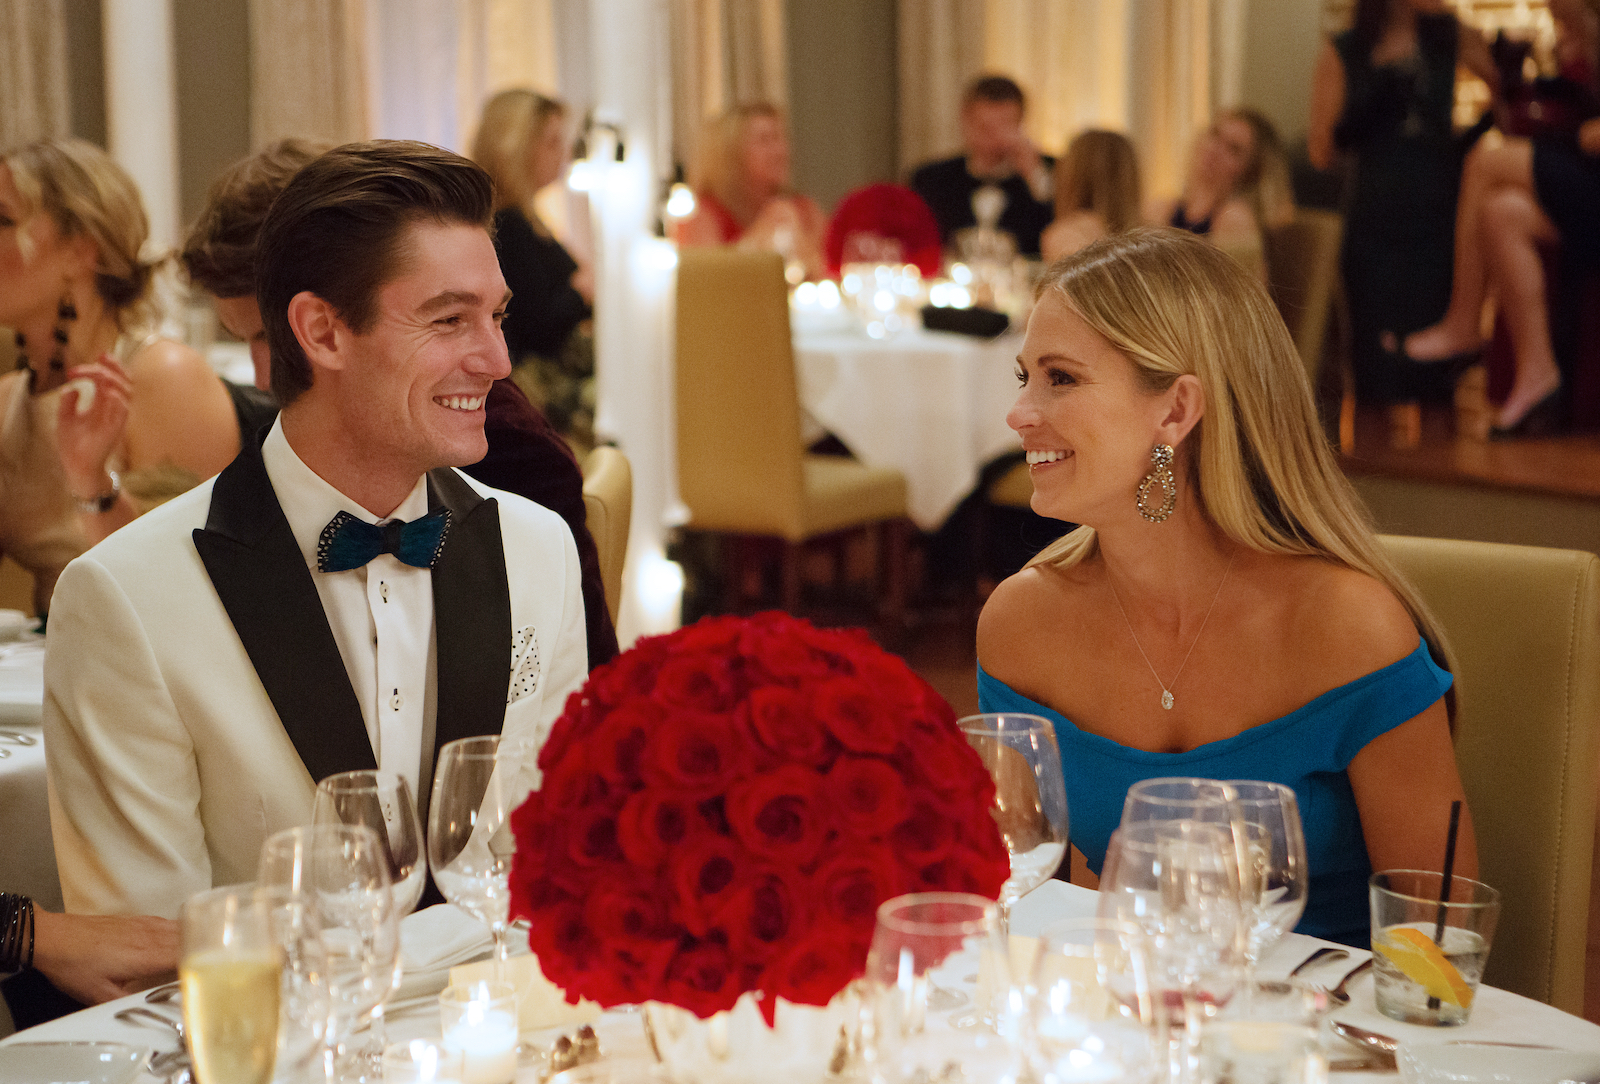 Craig Conover and Cameran Eubanks from 'Southern Charm' smile at each other during dinner at a party